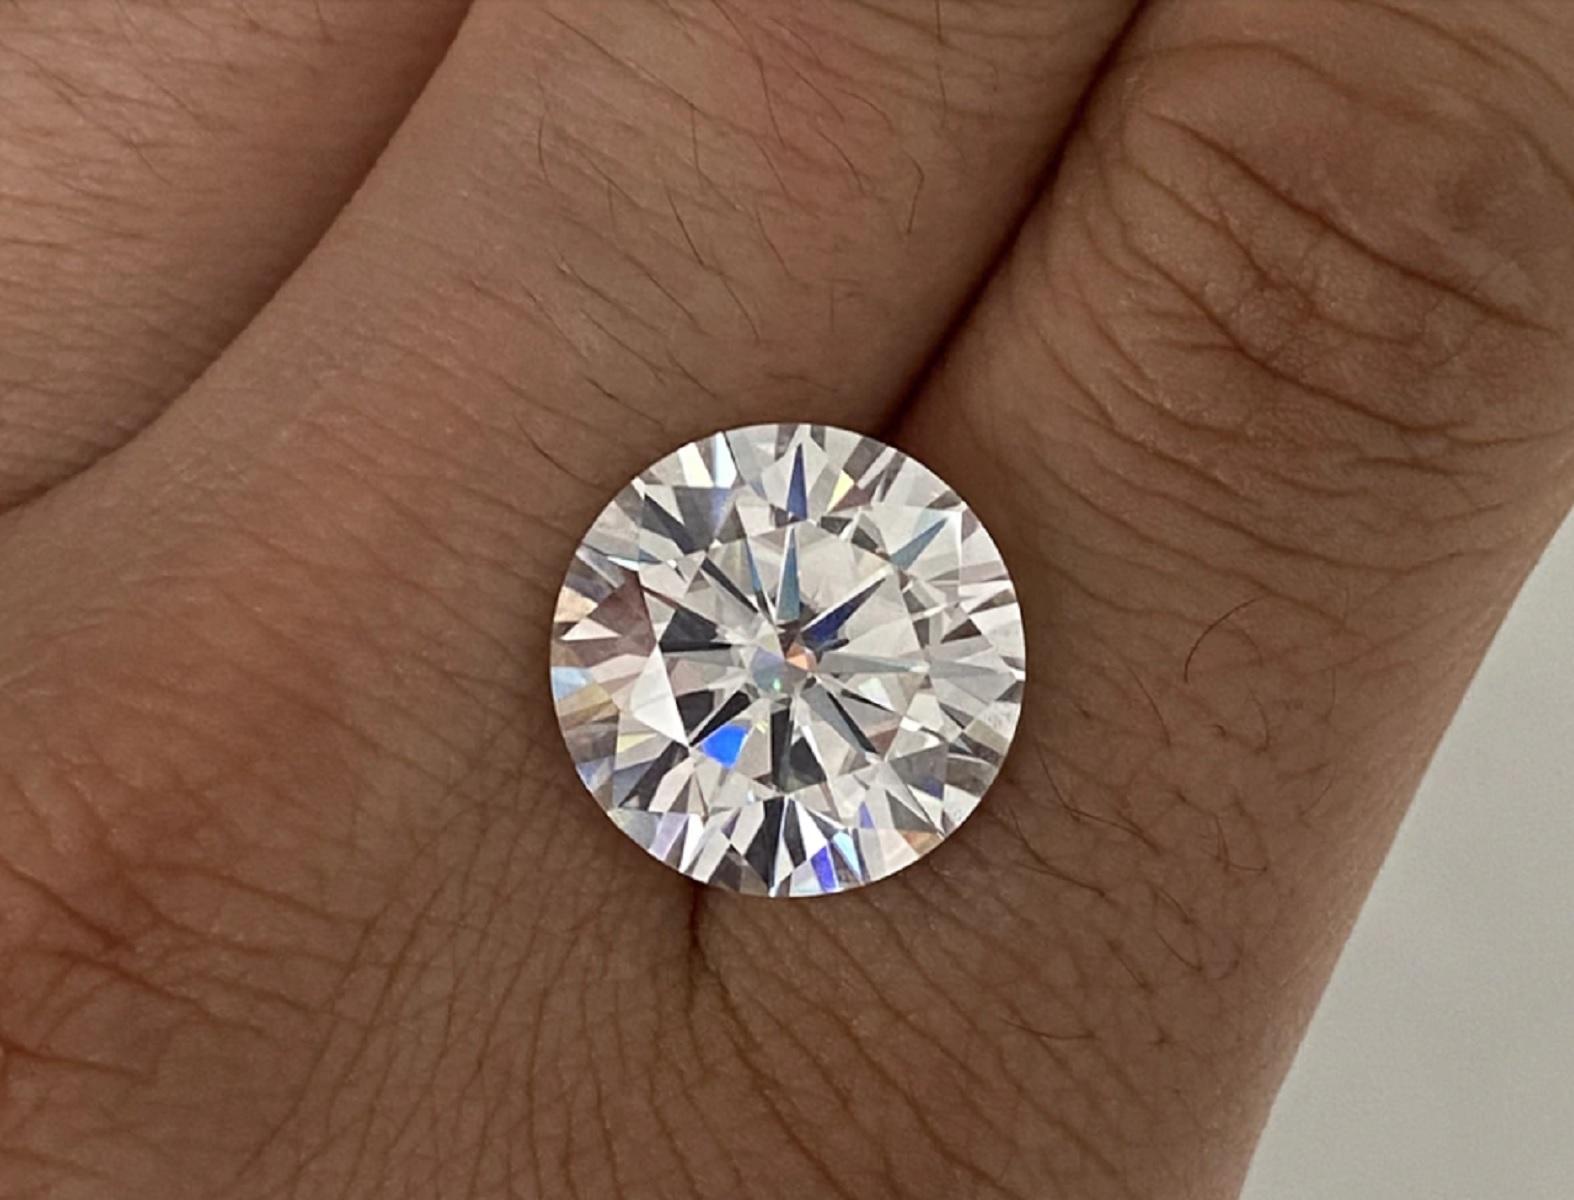 GIA exceptional 4 carat round brilliant cut diamond solitaire ring the main stone is I. flawless diamond with triple excellent cut and none fluorescence.
